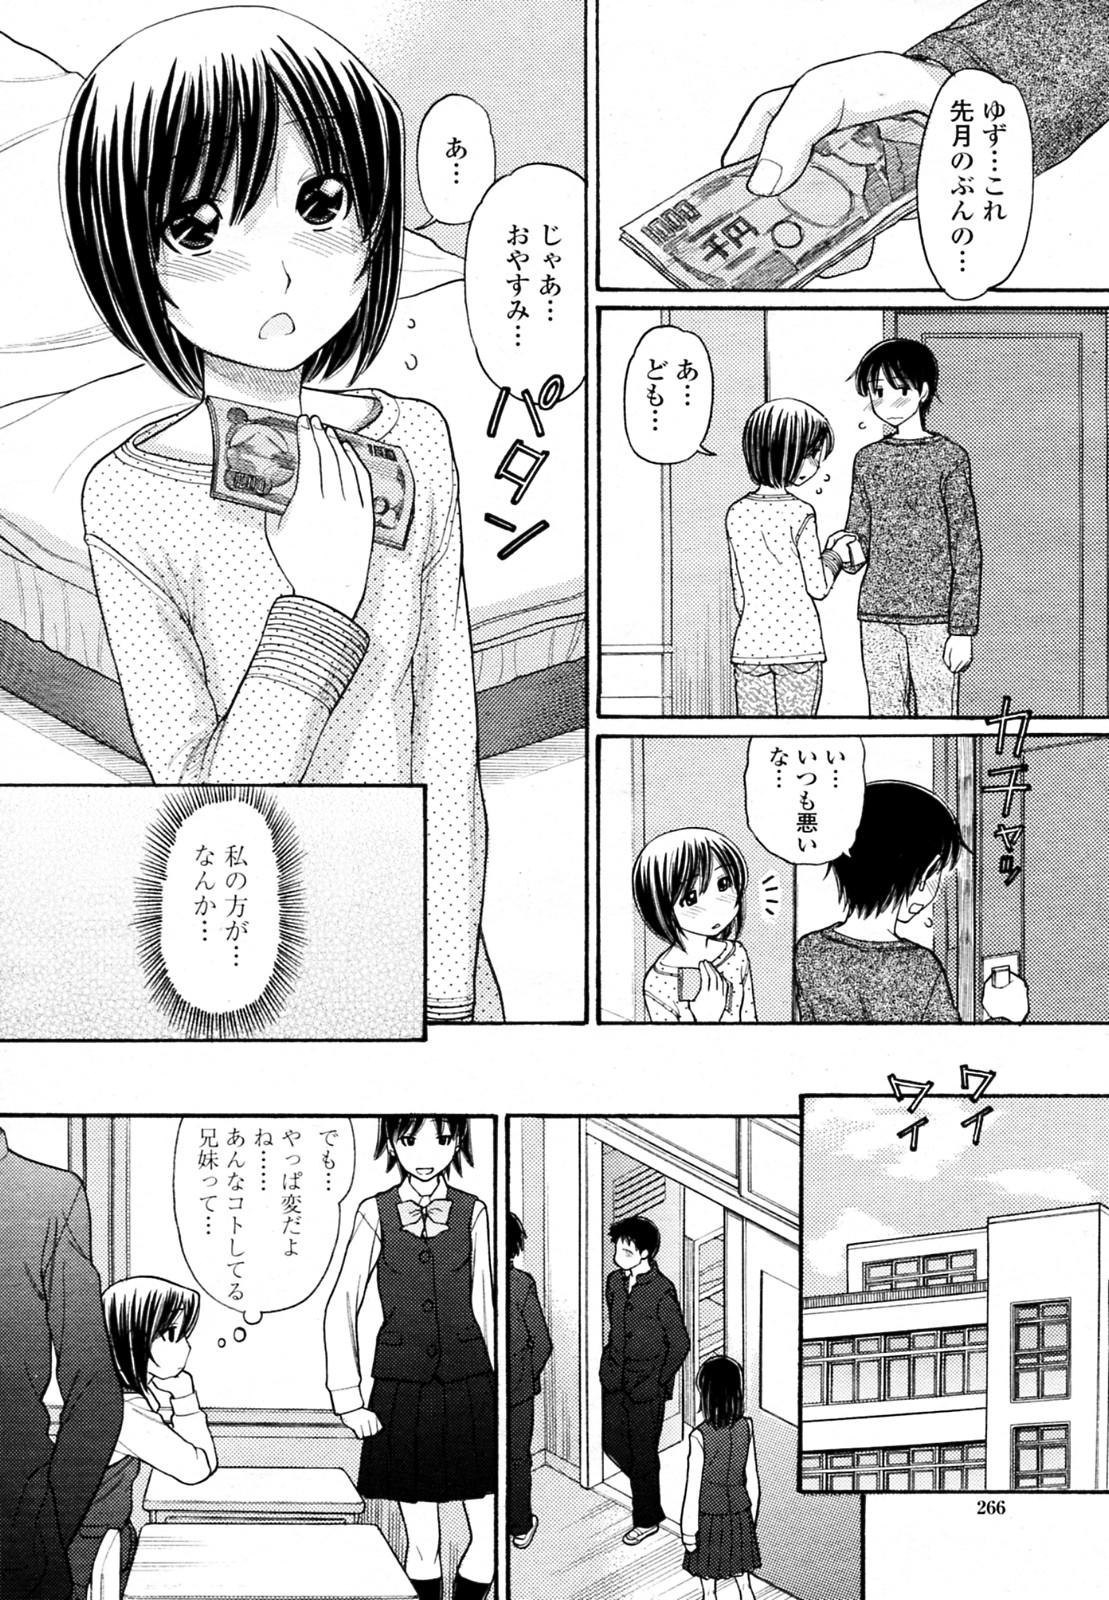 Curious Sister Price Ch. 1-5 8teenxxx - Page 6